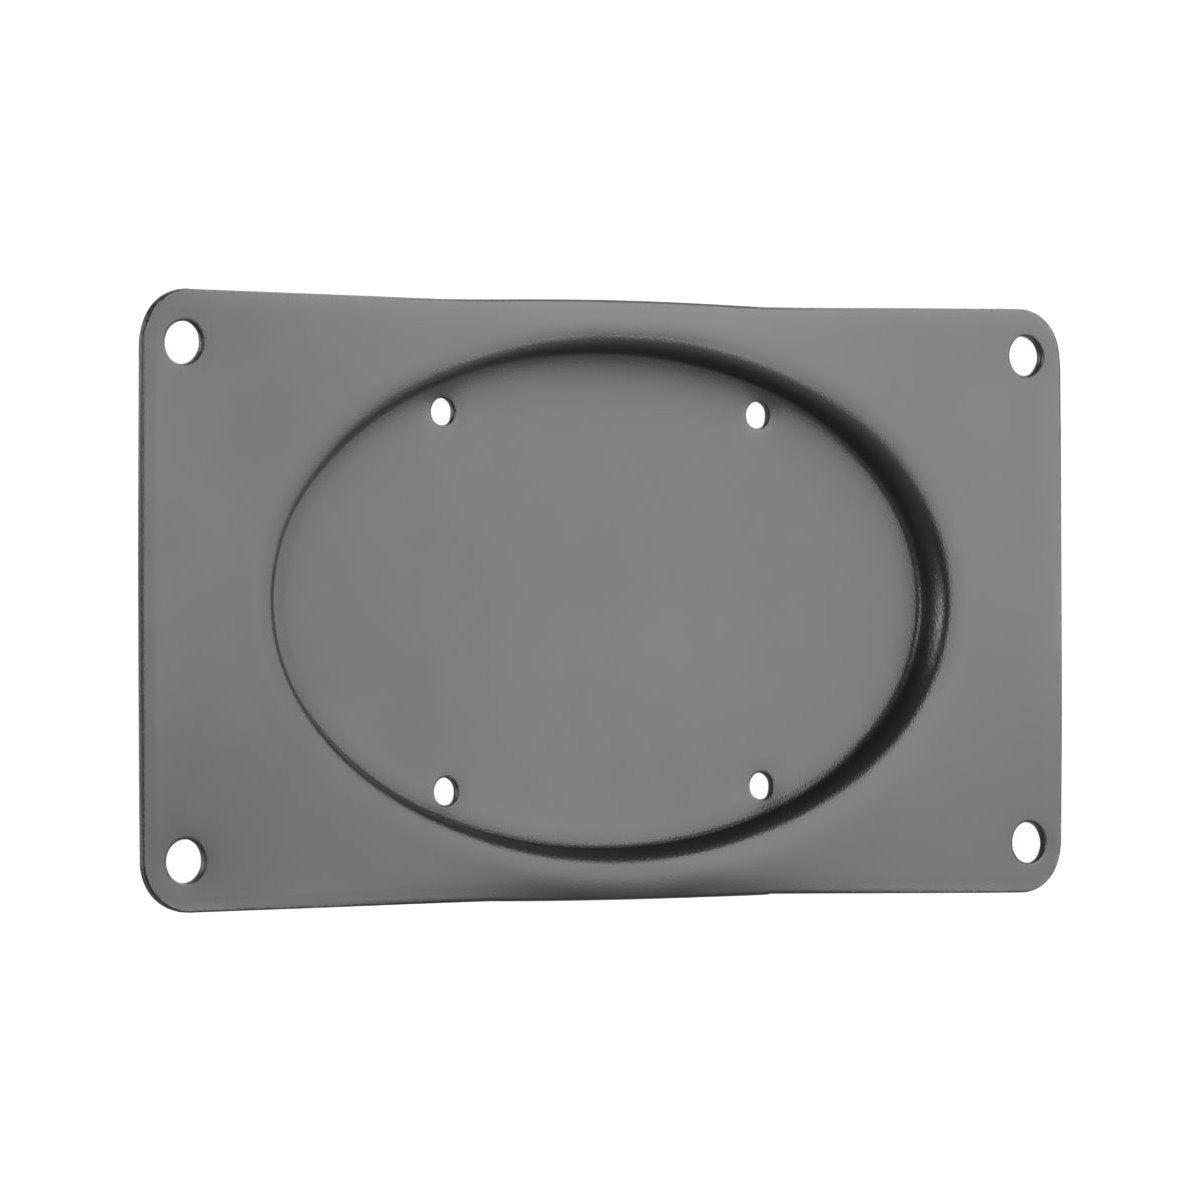 Monitor Arm VESA Extension Adaptor Plate fits 200 x 100 Mounting Pattern